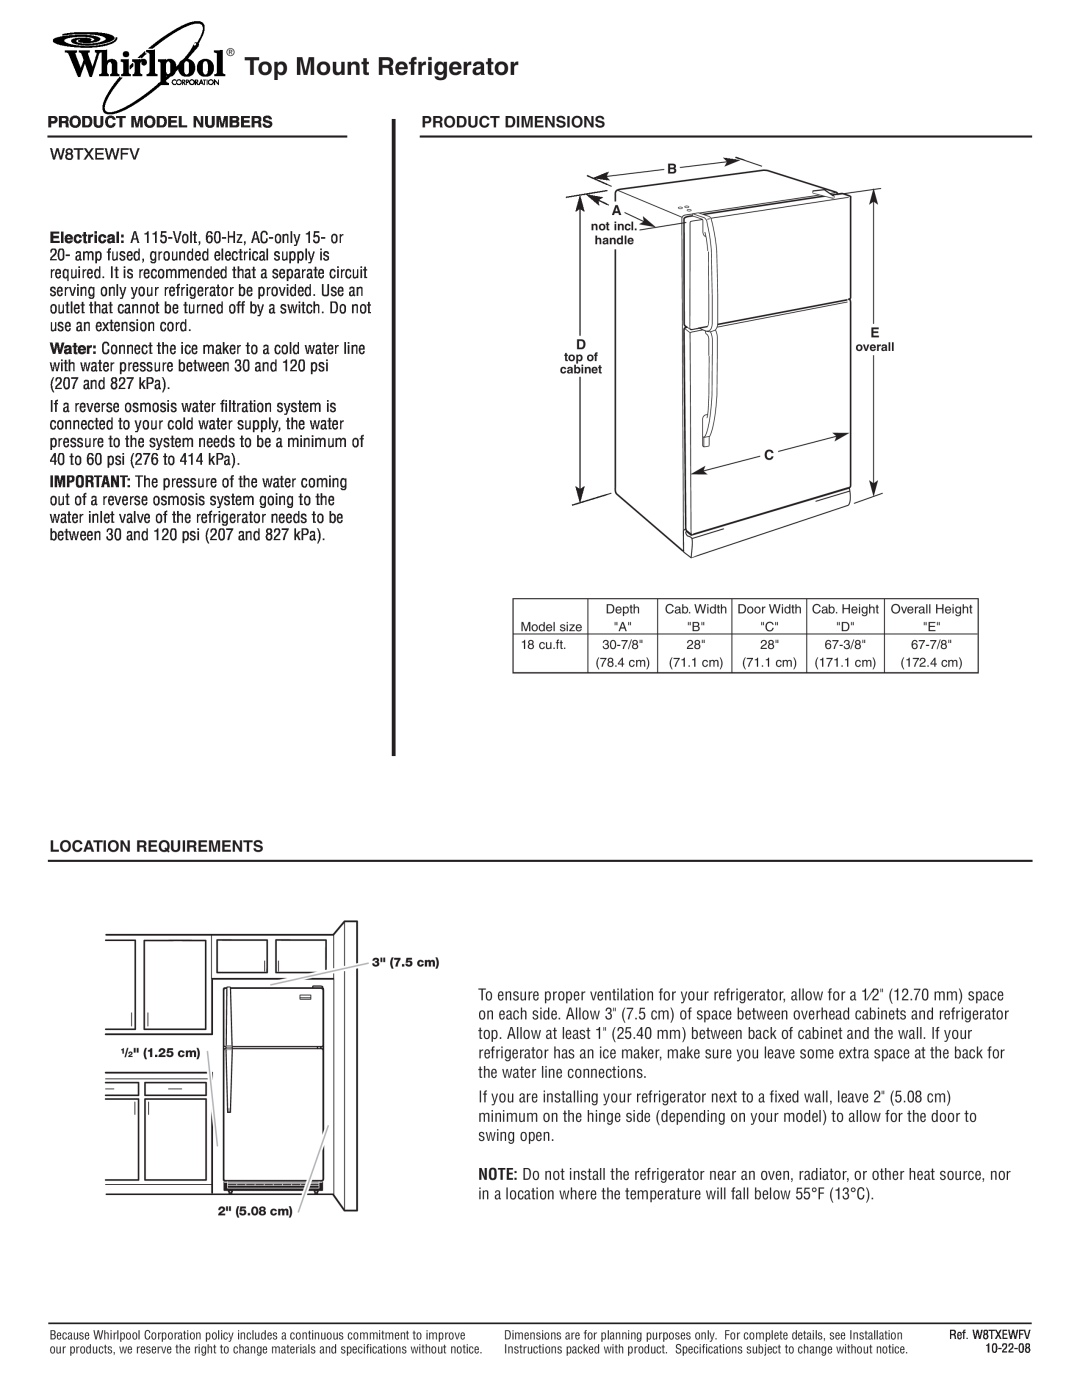 Whirlpool W8TXEWFV dimensions Top Mount Refrigerator, Product Model Numbers, Product Dimensions, Location Requirements 